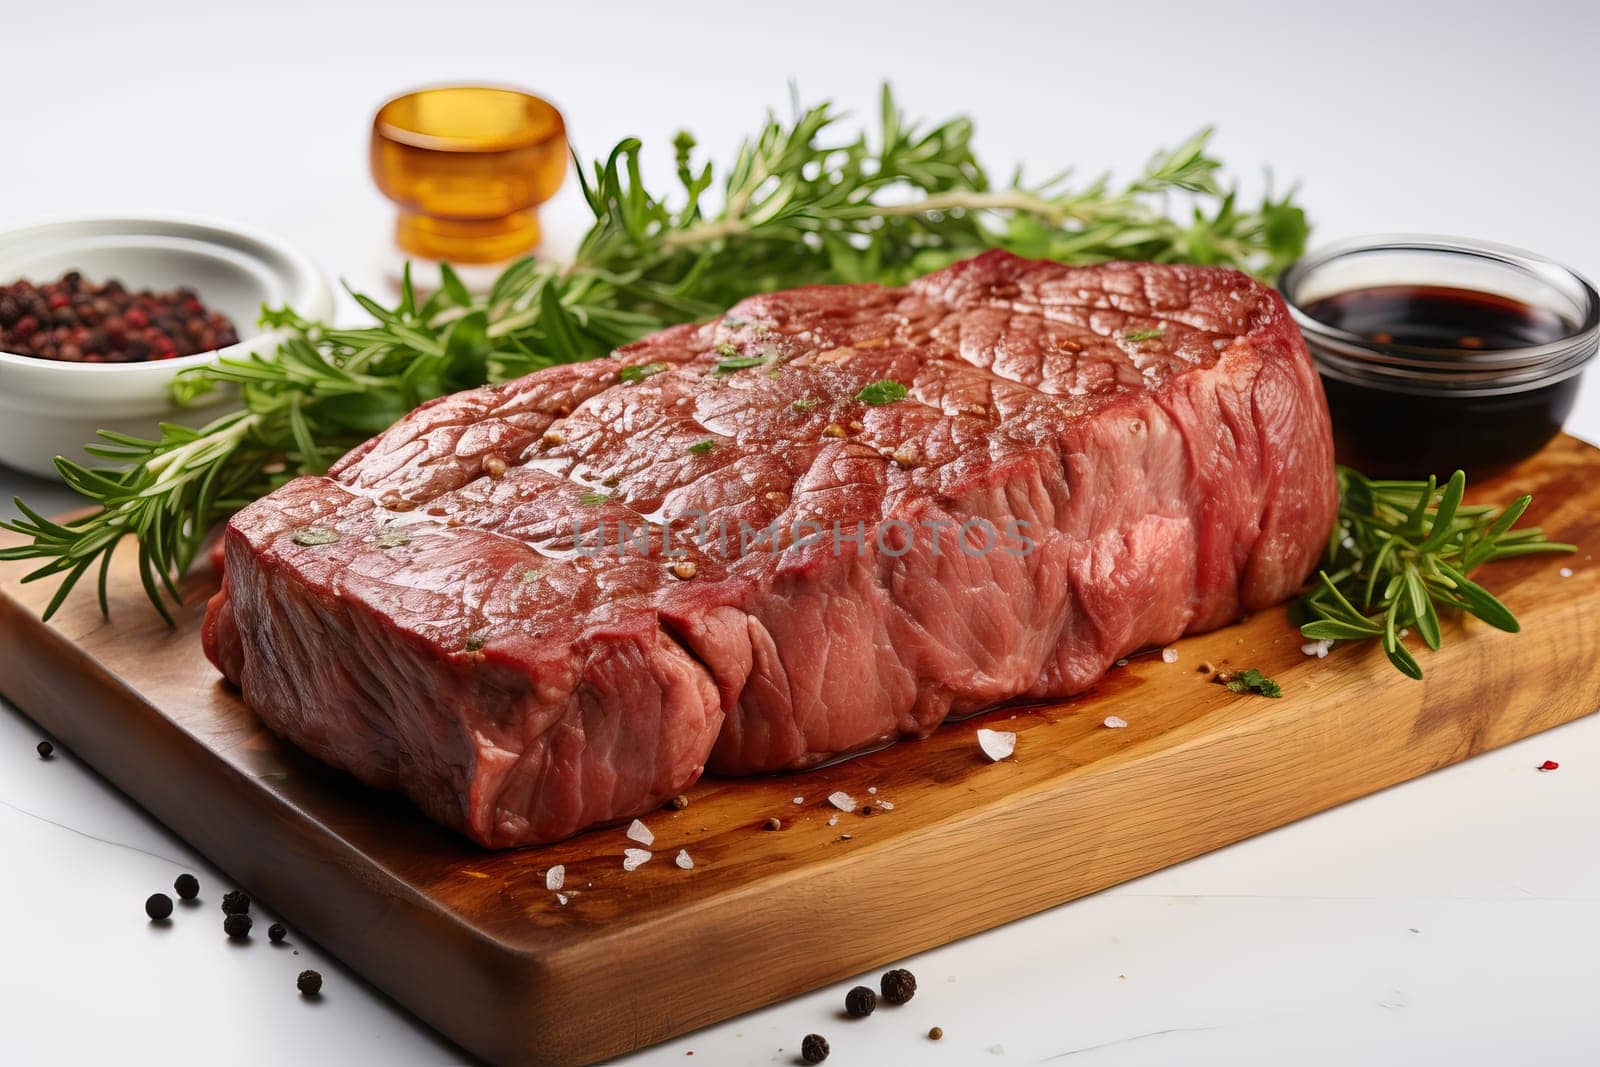 grilled large piece of beef on a barbecue and served on a wooden board, on a white background.